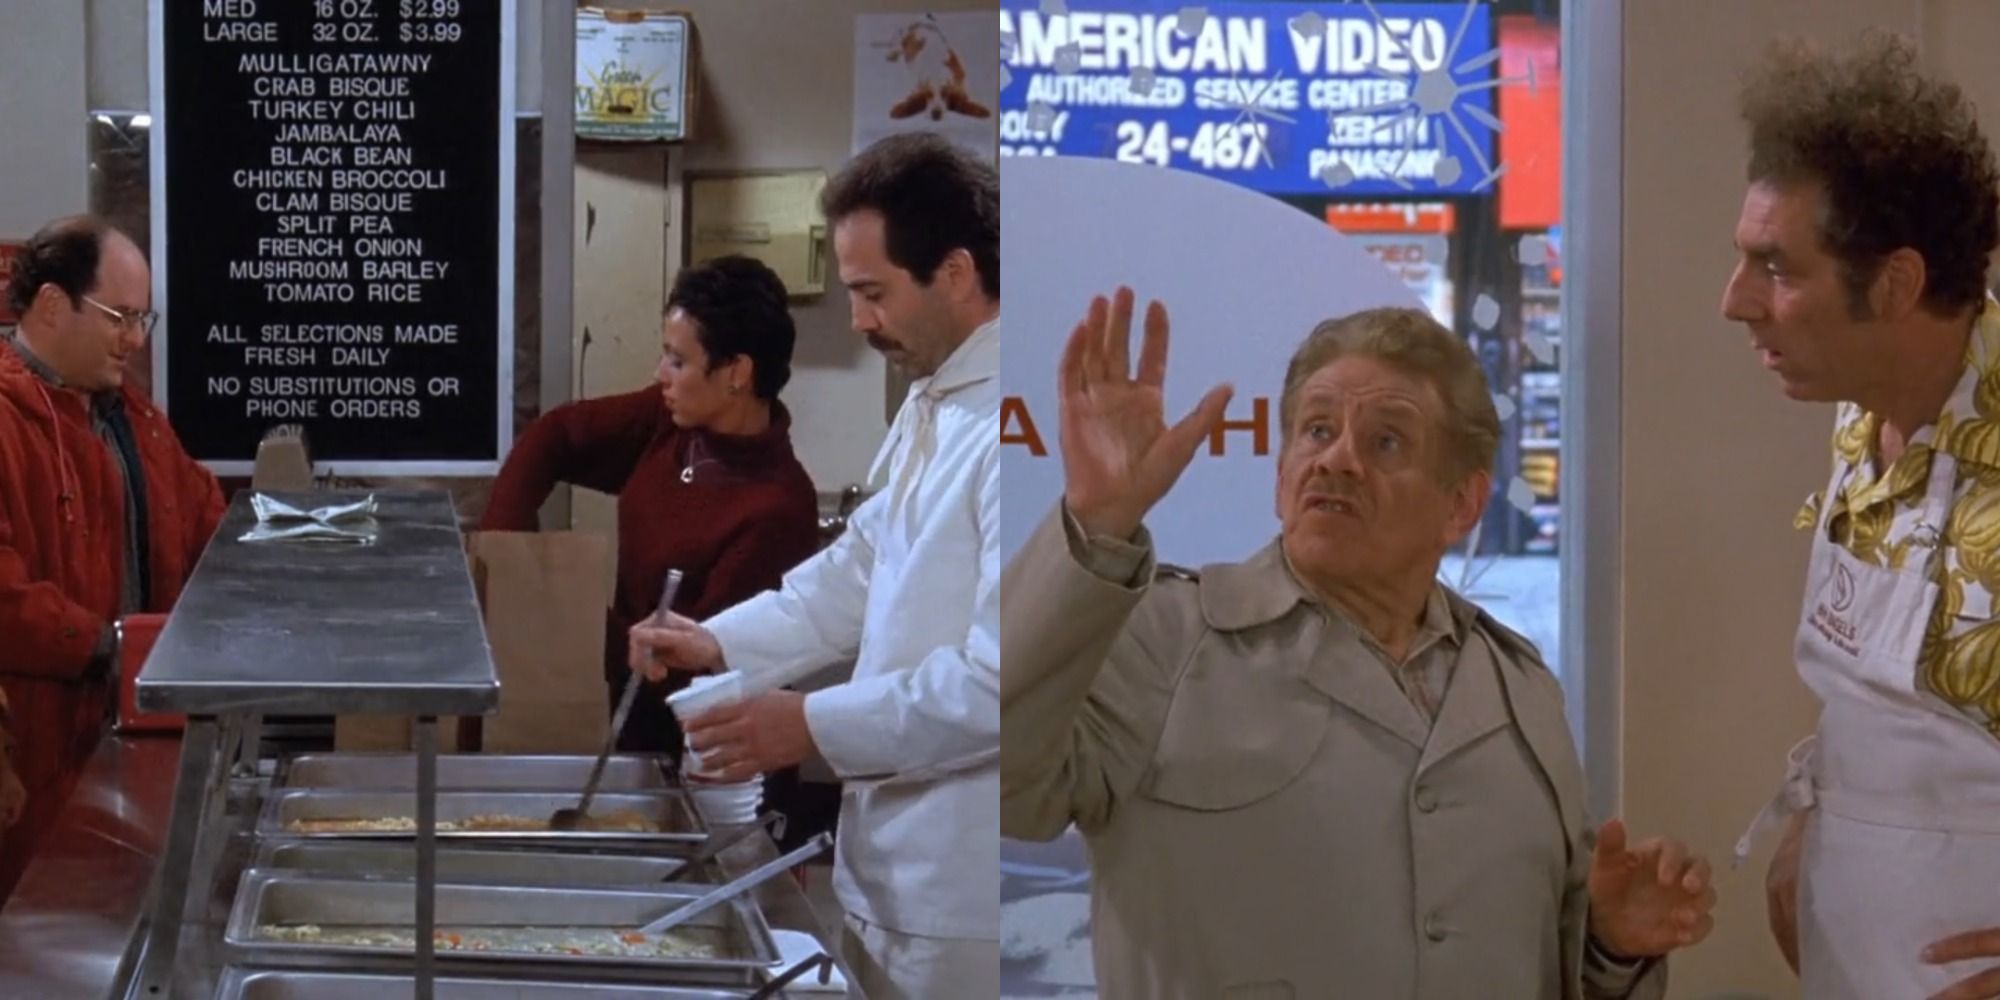 Seinfeld 10 Scenes Viewers Love To Watch Over And Over